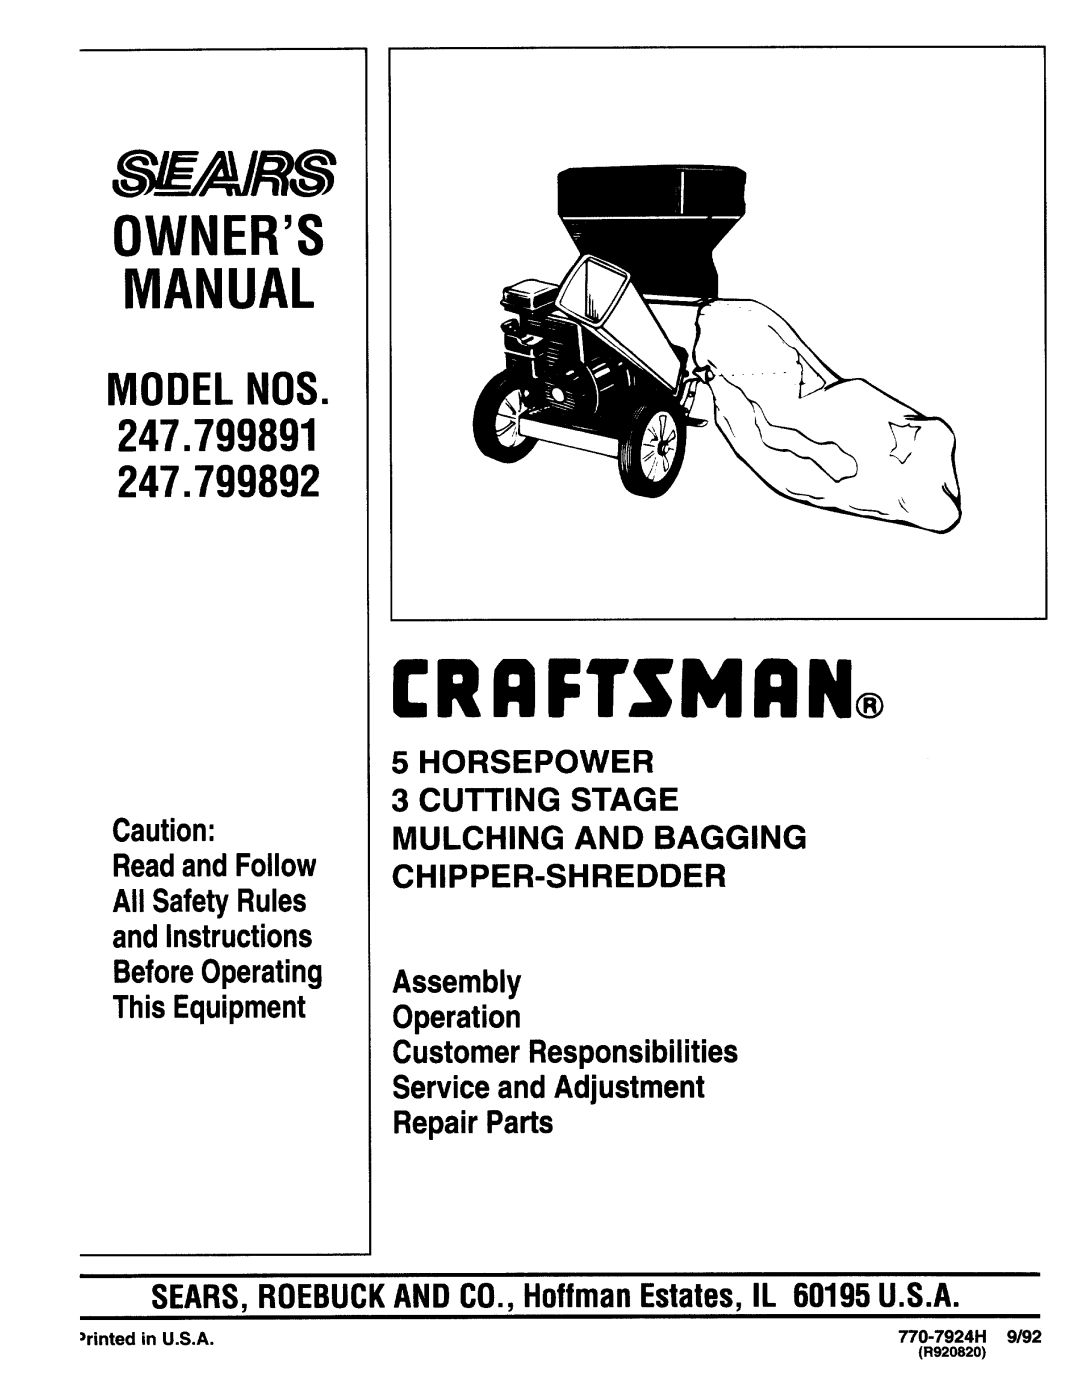 Craftsman 247.799892 manual Caution ReadandFollow, AllSafetyRules andInstructions, BeforeOperating ThisEquipment, Modelnos 